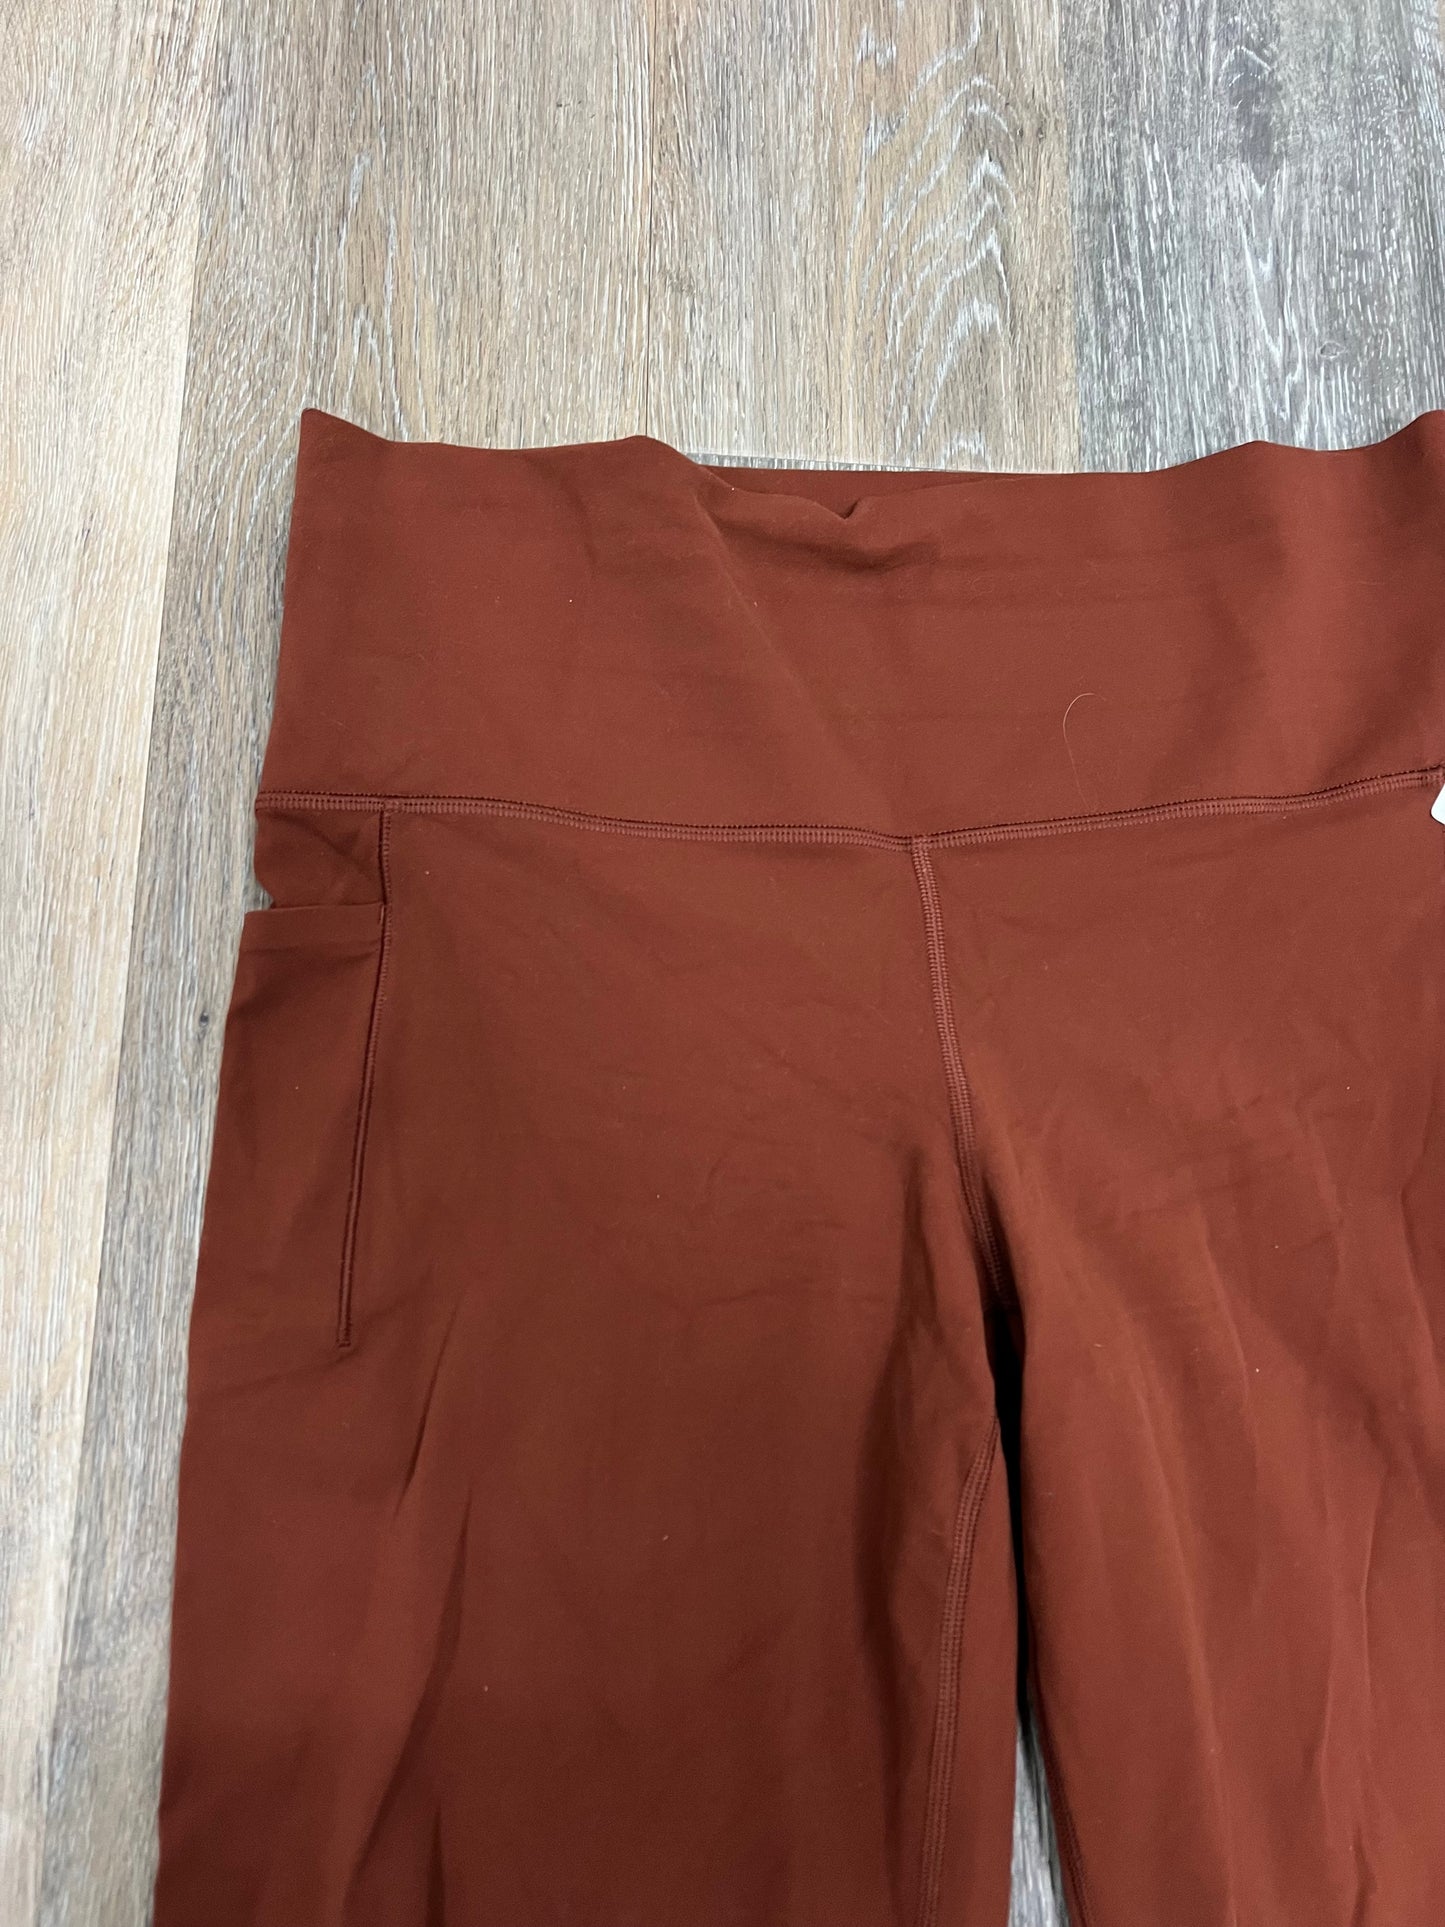 Athletic Pants By Athleta  Size: 1x